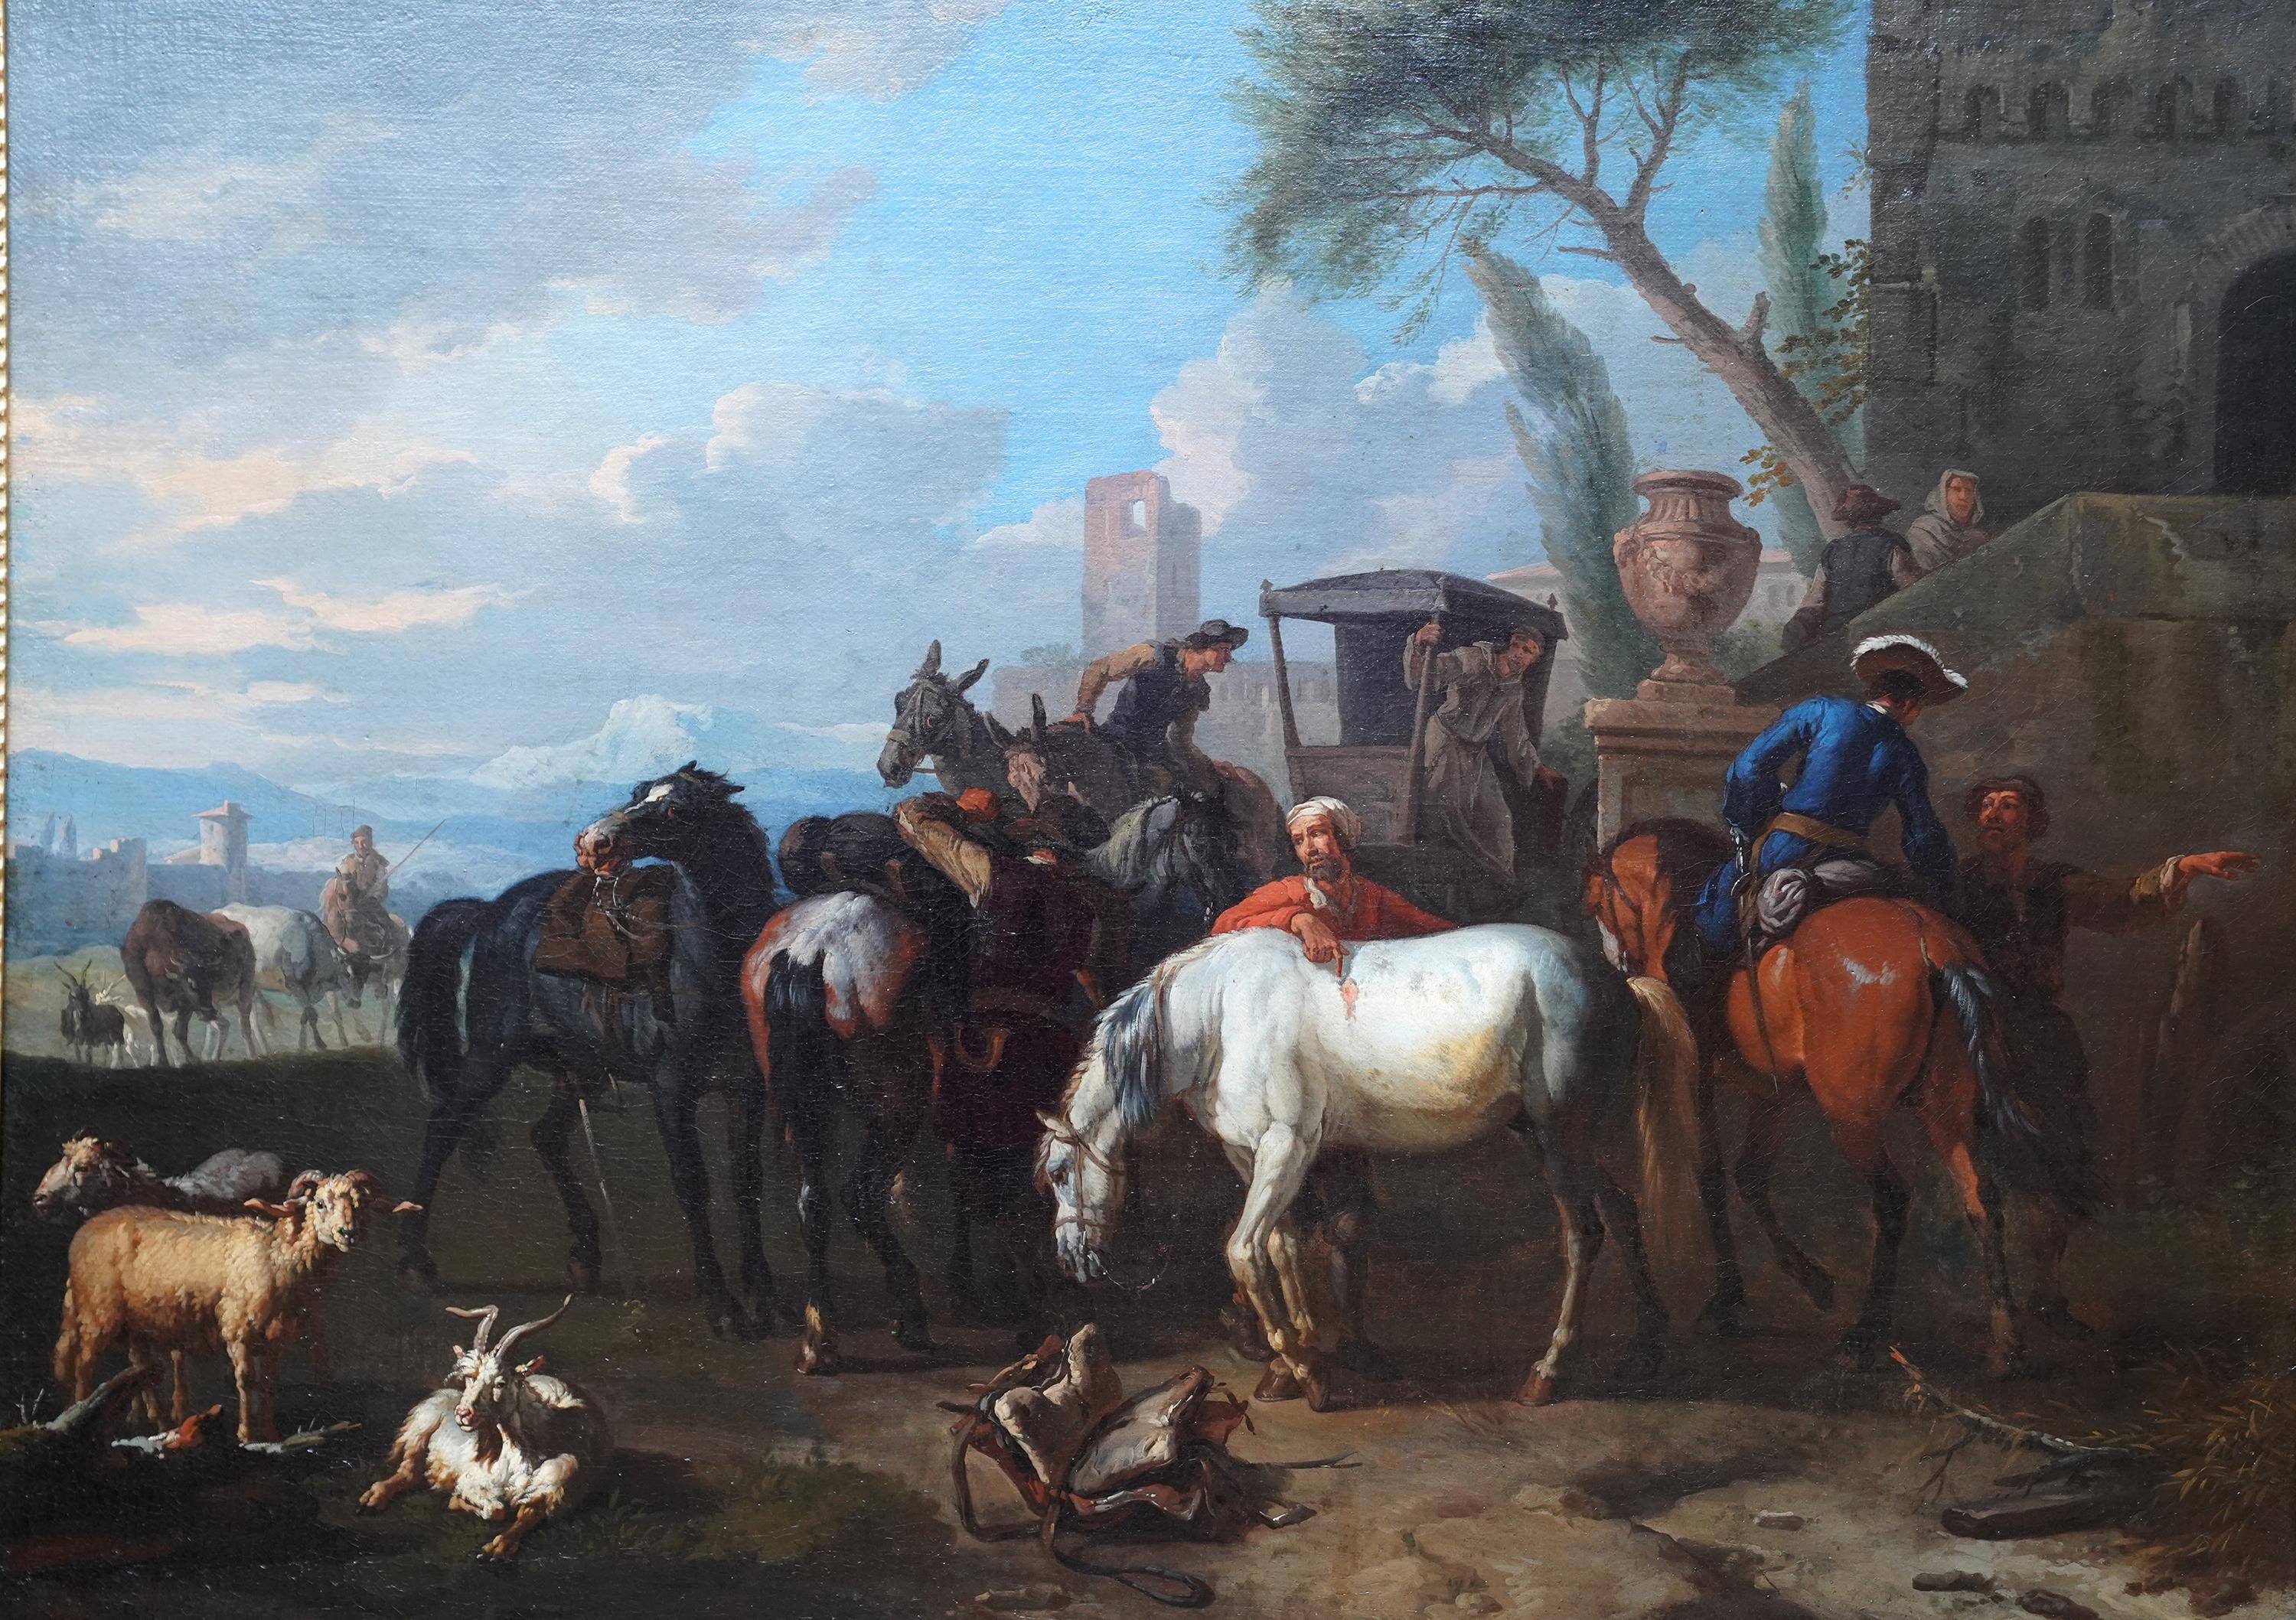 Travellers and Carriage in Landscape Dutch 17th century  Golden Age oil painting For Sale 12